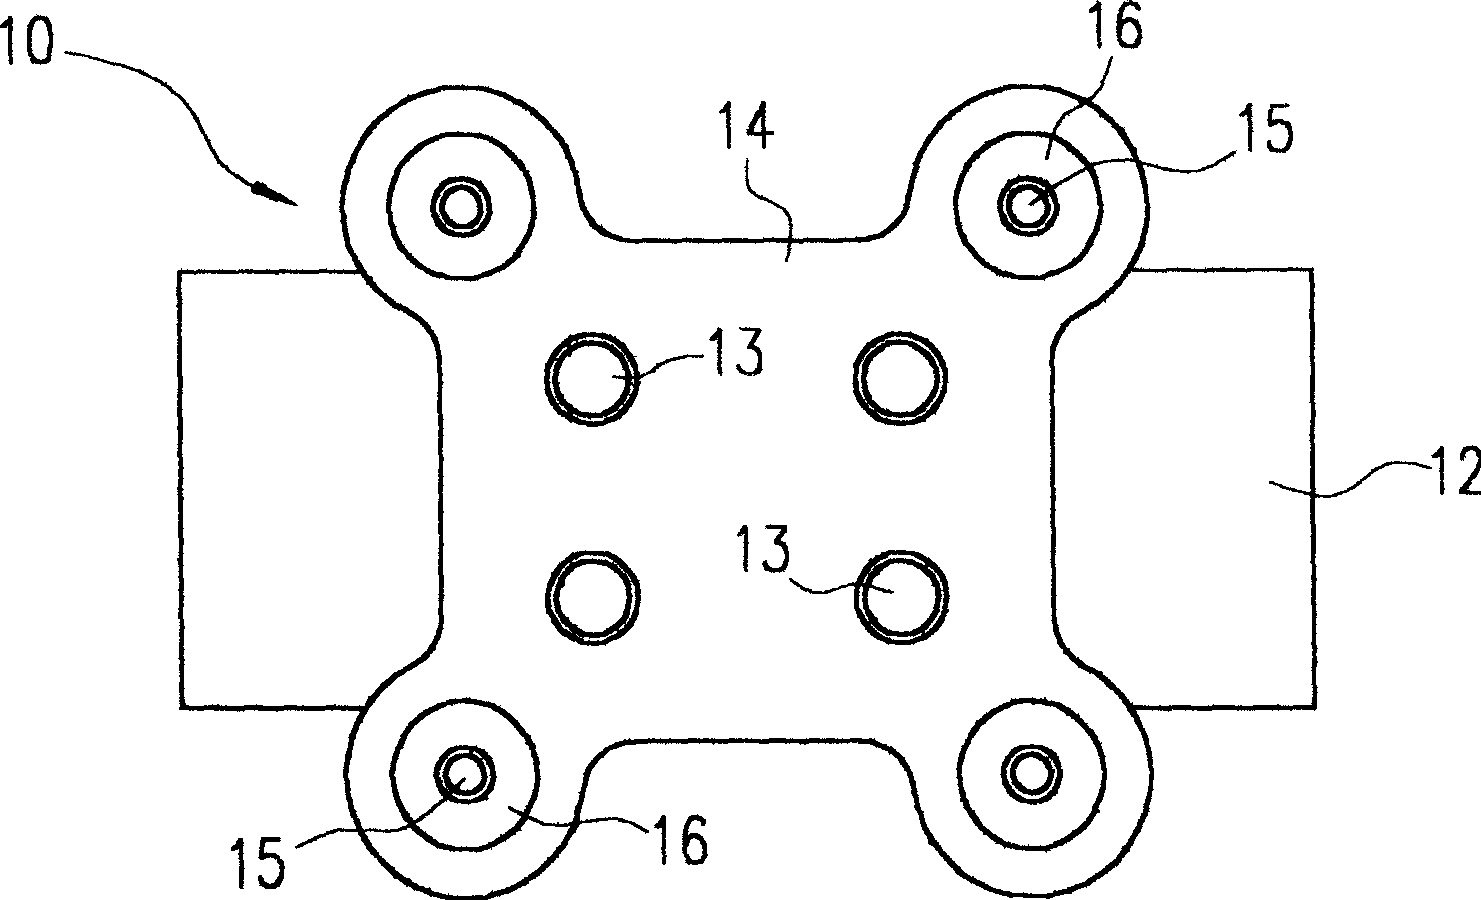 Tightening mechanism for opening and closing filter press